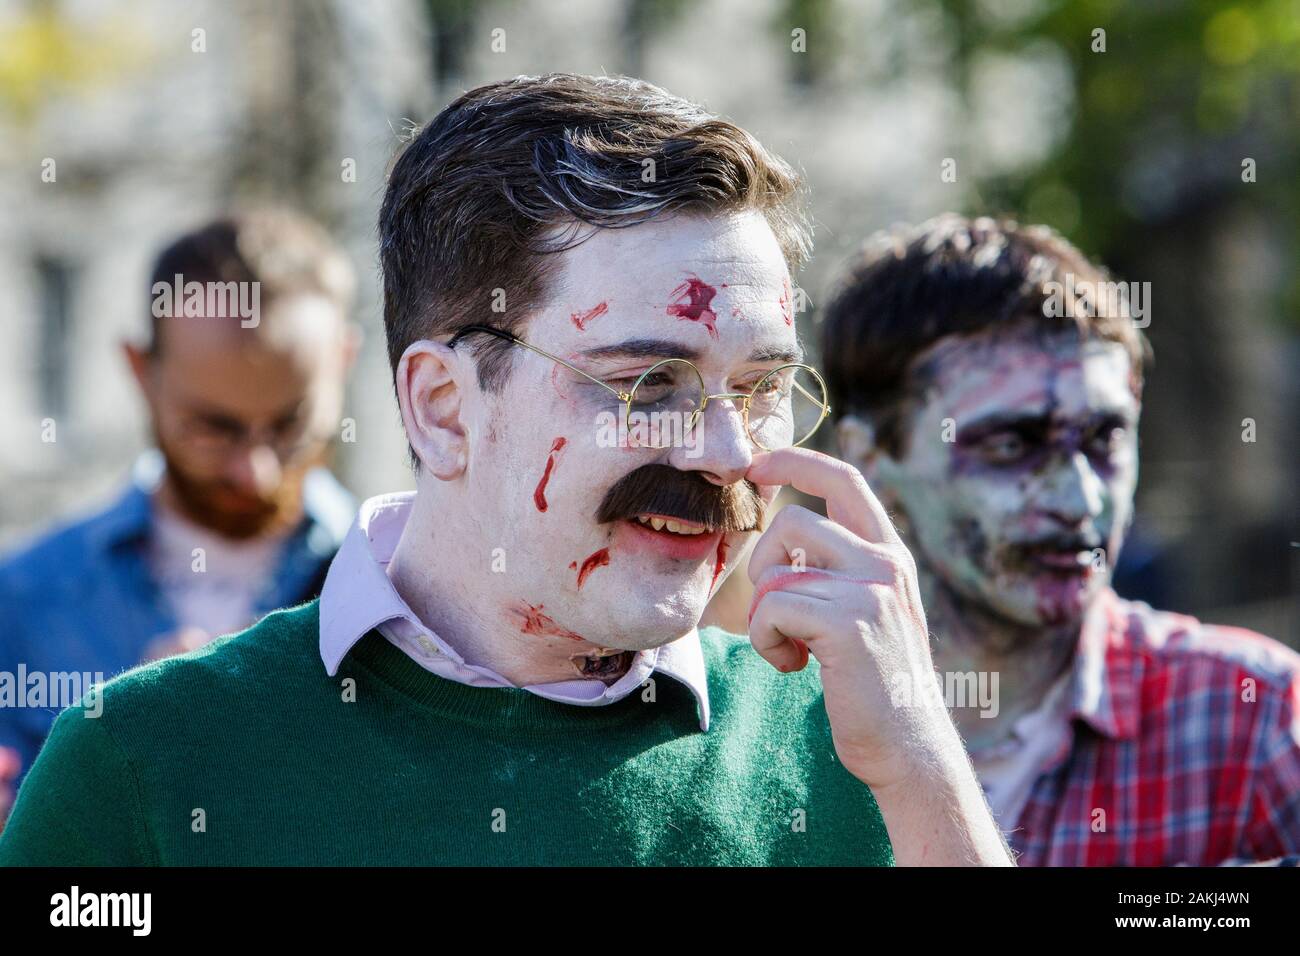 Bristol, UK. 28th Oct, 2017. A man dressed as a zombie is pictured as he participates in a zombie walk through the city centre. Stock Photo